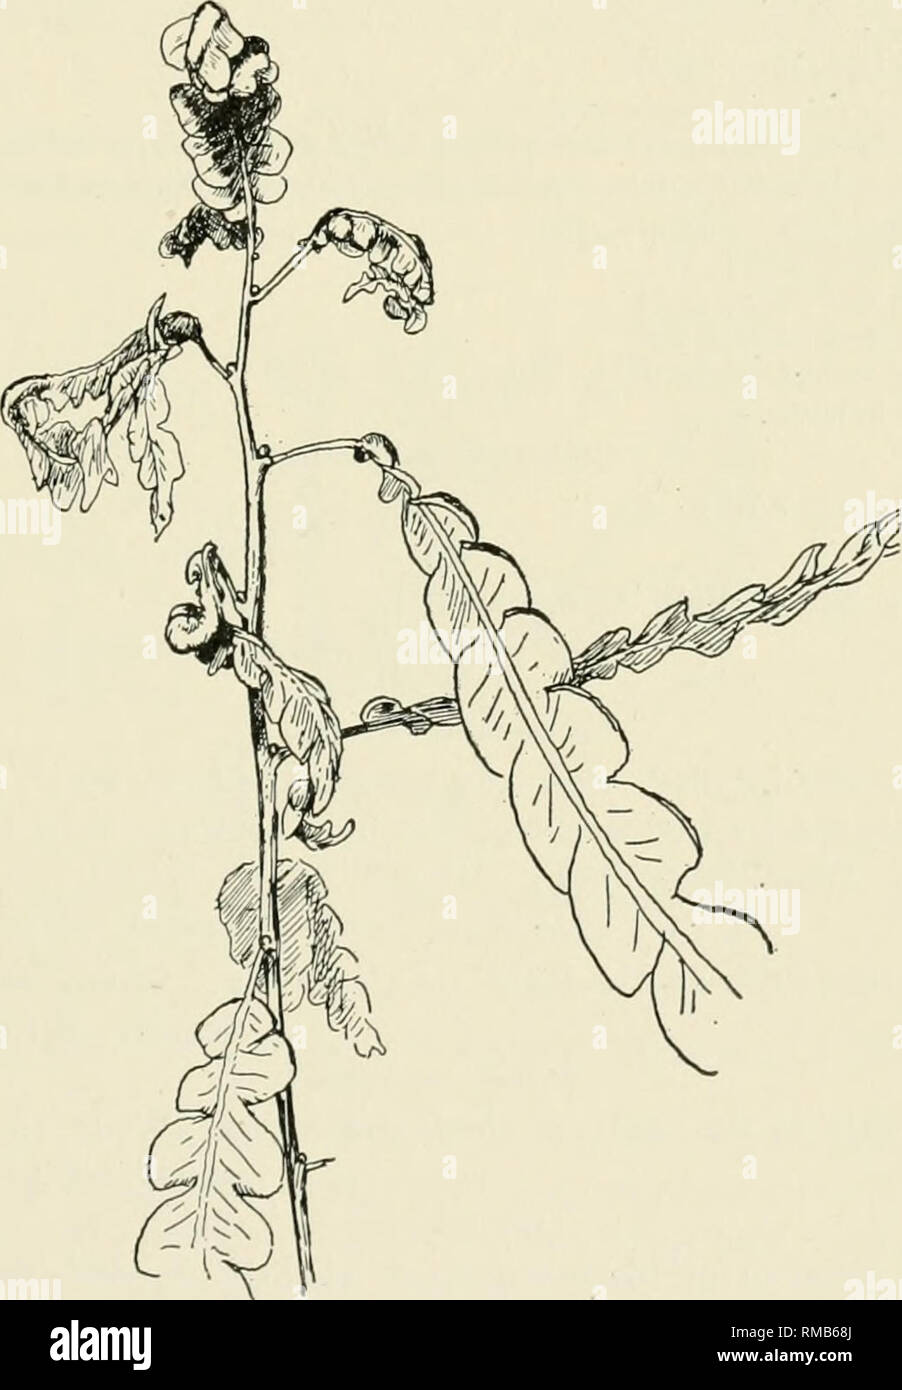 . Annual report. New York State Museum; Science -- New York (State); Plants -- New York (State); Animals -- New York (State). KKV TO AMERICAN INSECT GALLS 4« Myrica carolinensis (bayberry) Bayberry leaves badly dwarfed and deformed. PL 15, fig. 6. Thompson '16, p. 80 Acarid. Eriophyes sp. Juglandaceae (walnut family) Juglans cinerea (butternut) Folded, appressed, crinkled leaves Itonid. C e c i d o m y i a sp.. Fig. 45. Sweet fern midge, Janetiella aspleni- folia Felt. Deformed leaves. (Author's illustration) A brown, velvety erineum surrounding the leaf stalks or on the main veins, causing a  Stock Photo